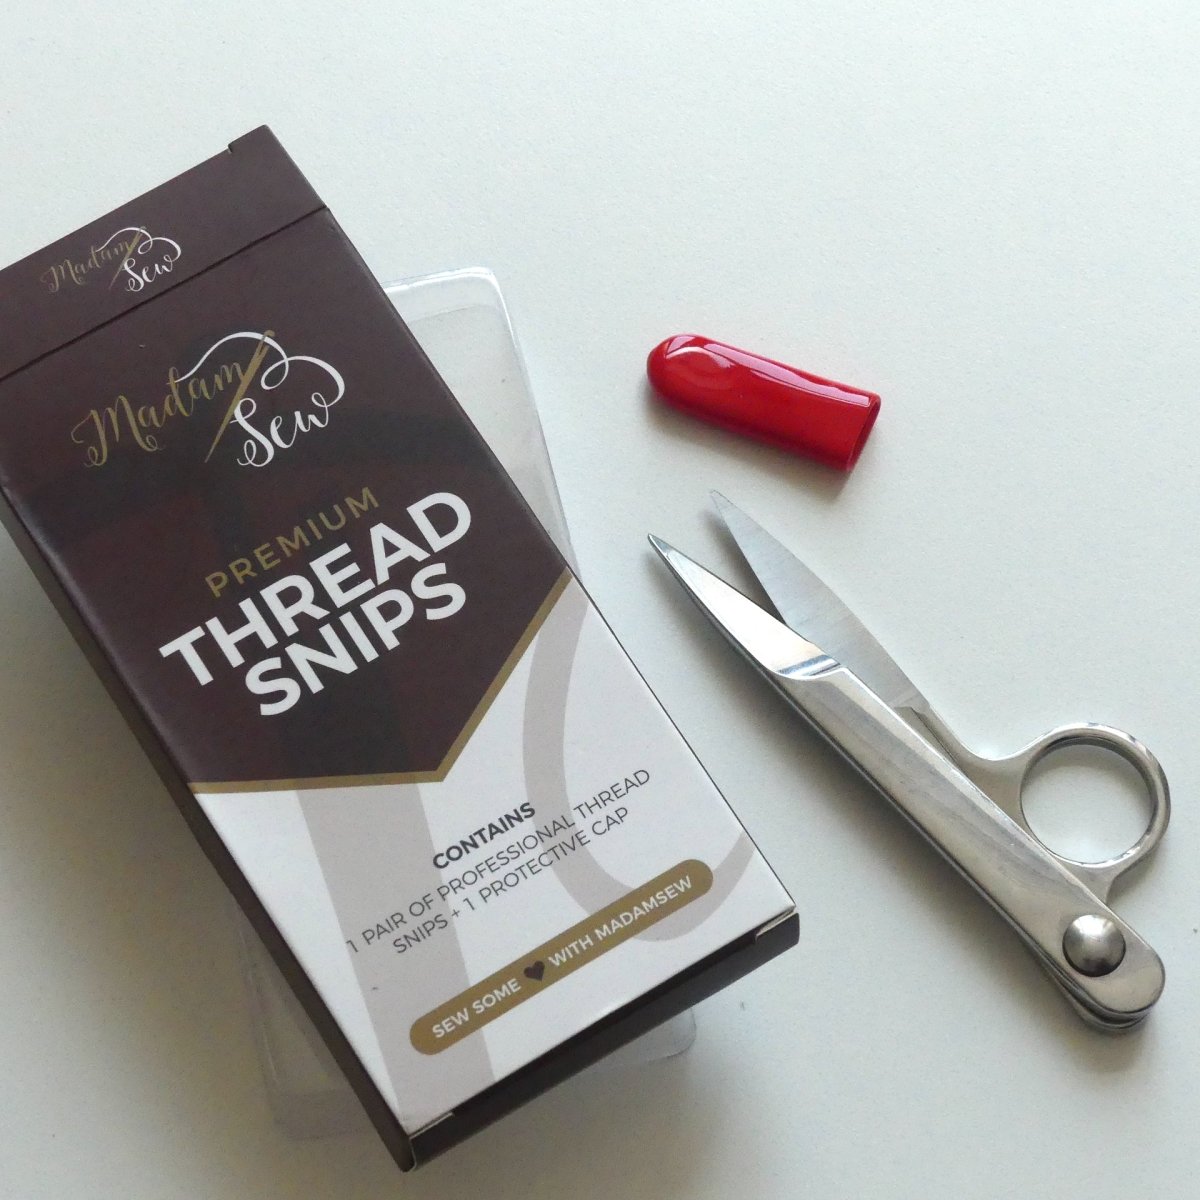 Thread snips with the red protection cap and the box